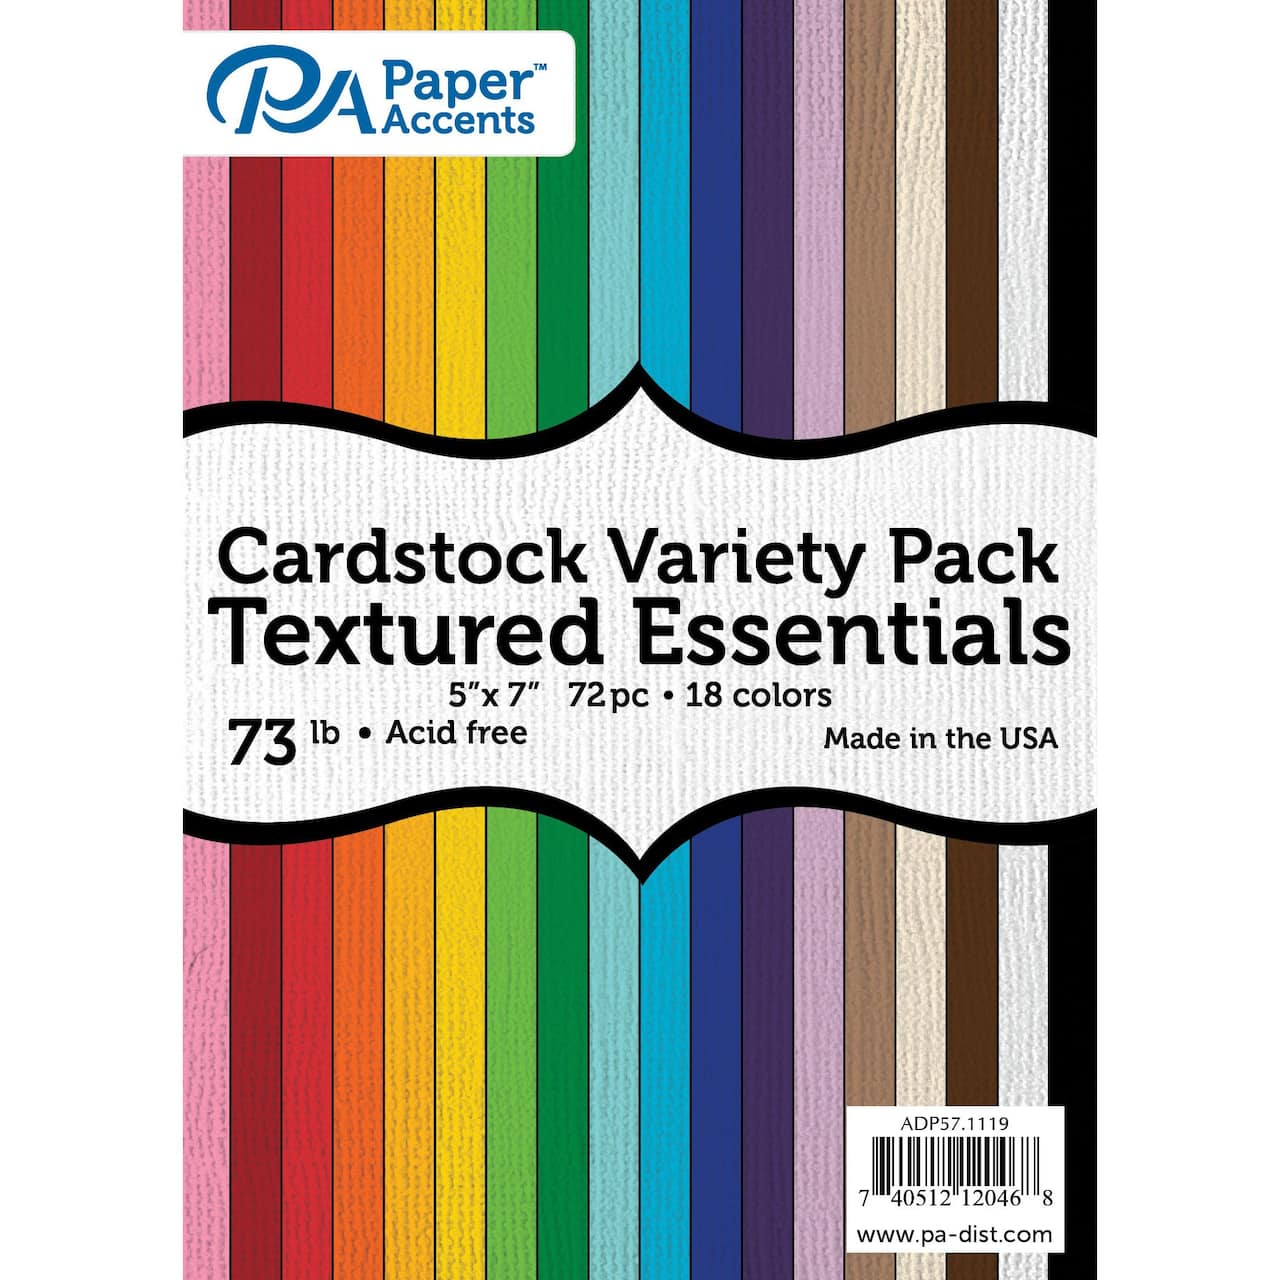 PA Paper™ Accents Textured Essentials 5 x 7 Cardstock Variety Pack